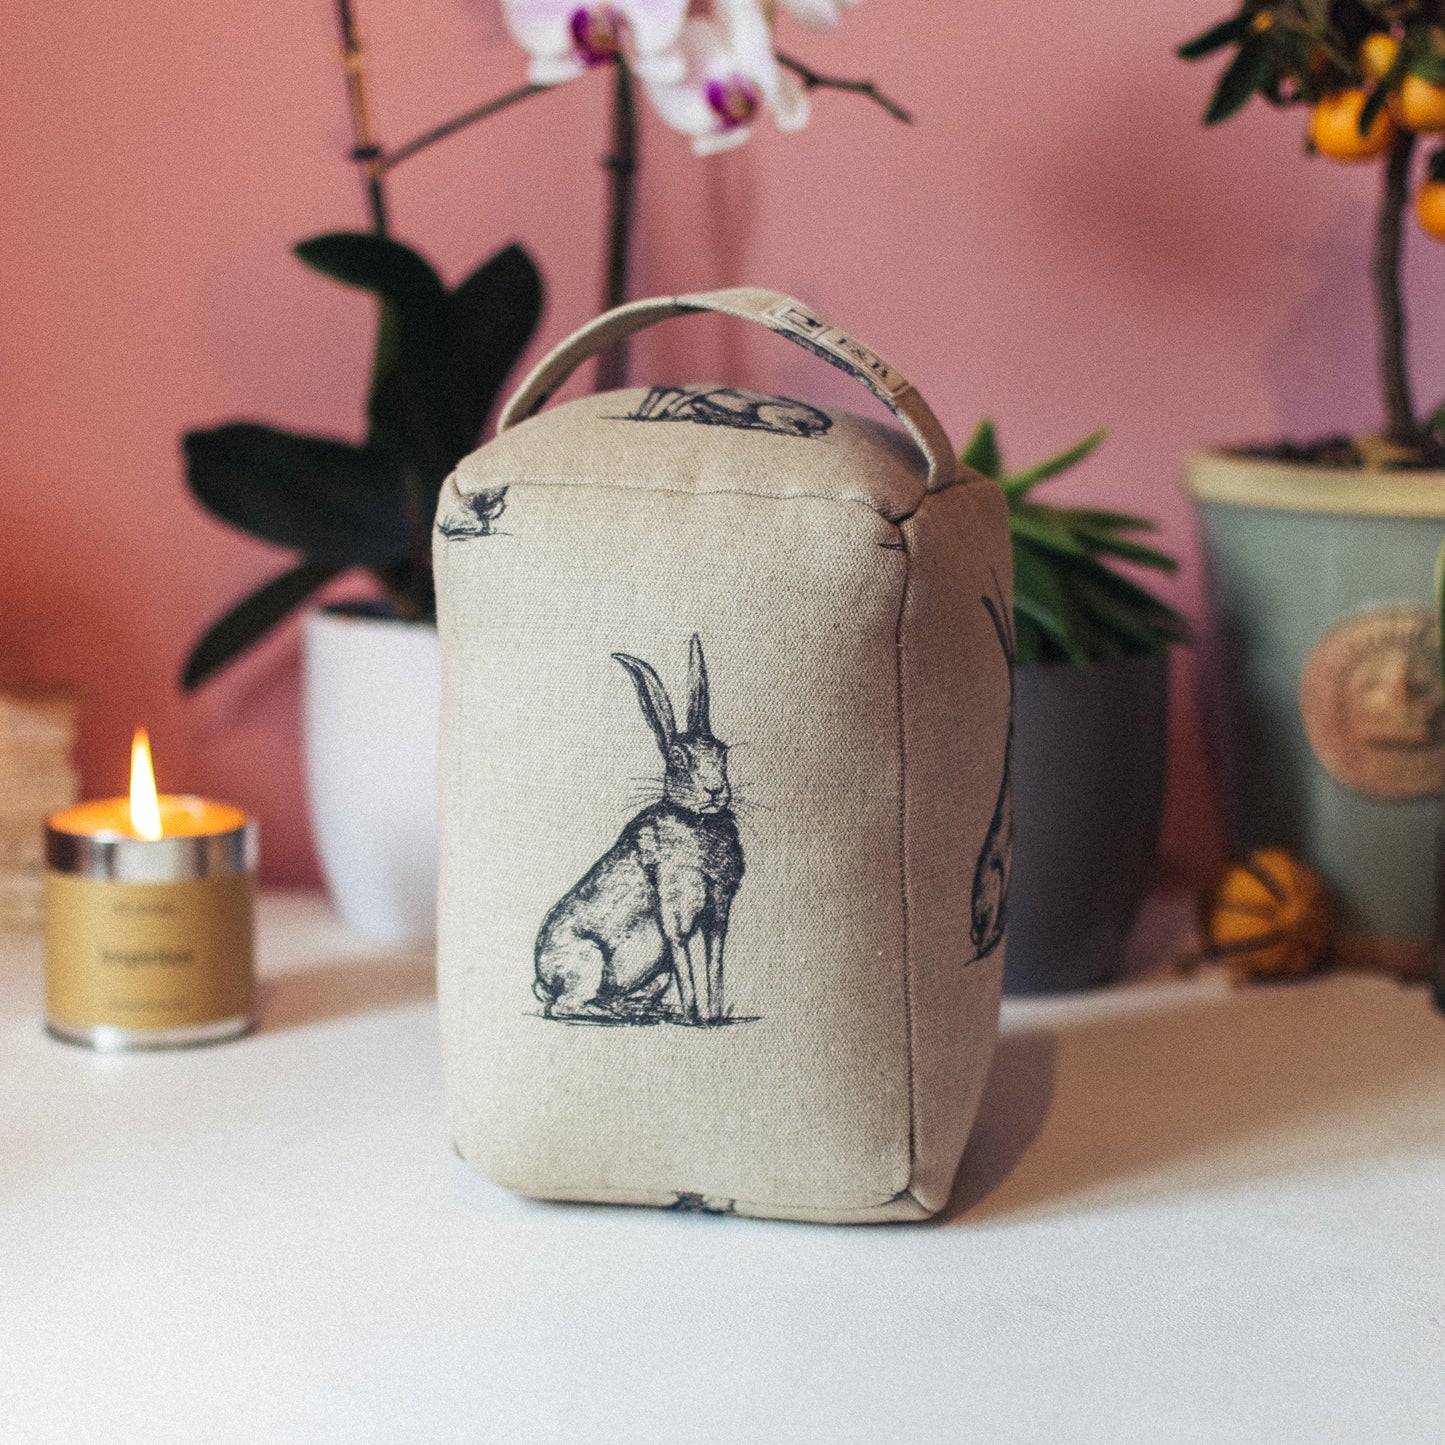 F&B Crafts - Handmade Country Home Decor featuring hares on linen fabric handmade in Yorkshire